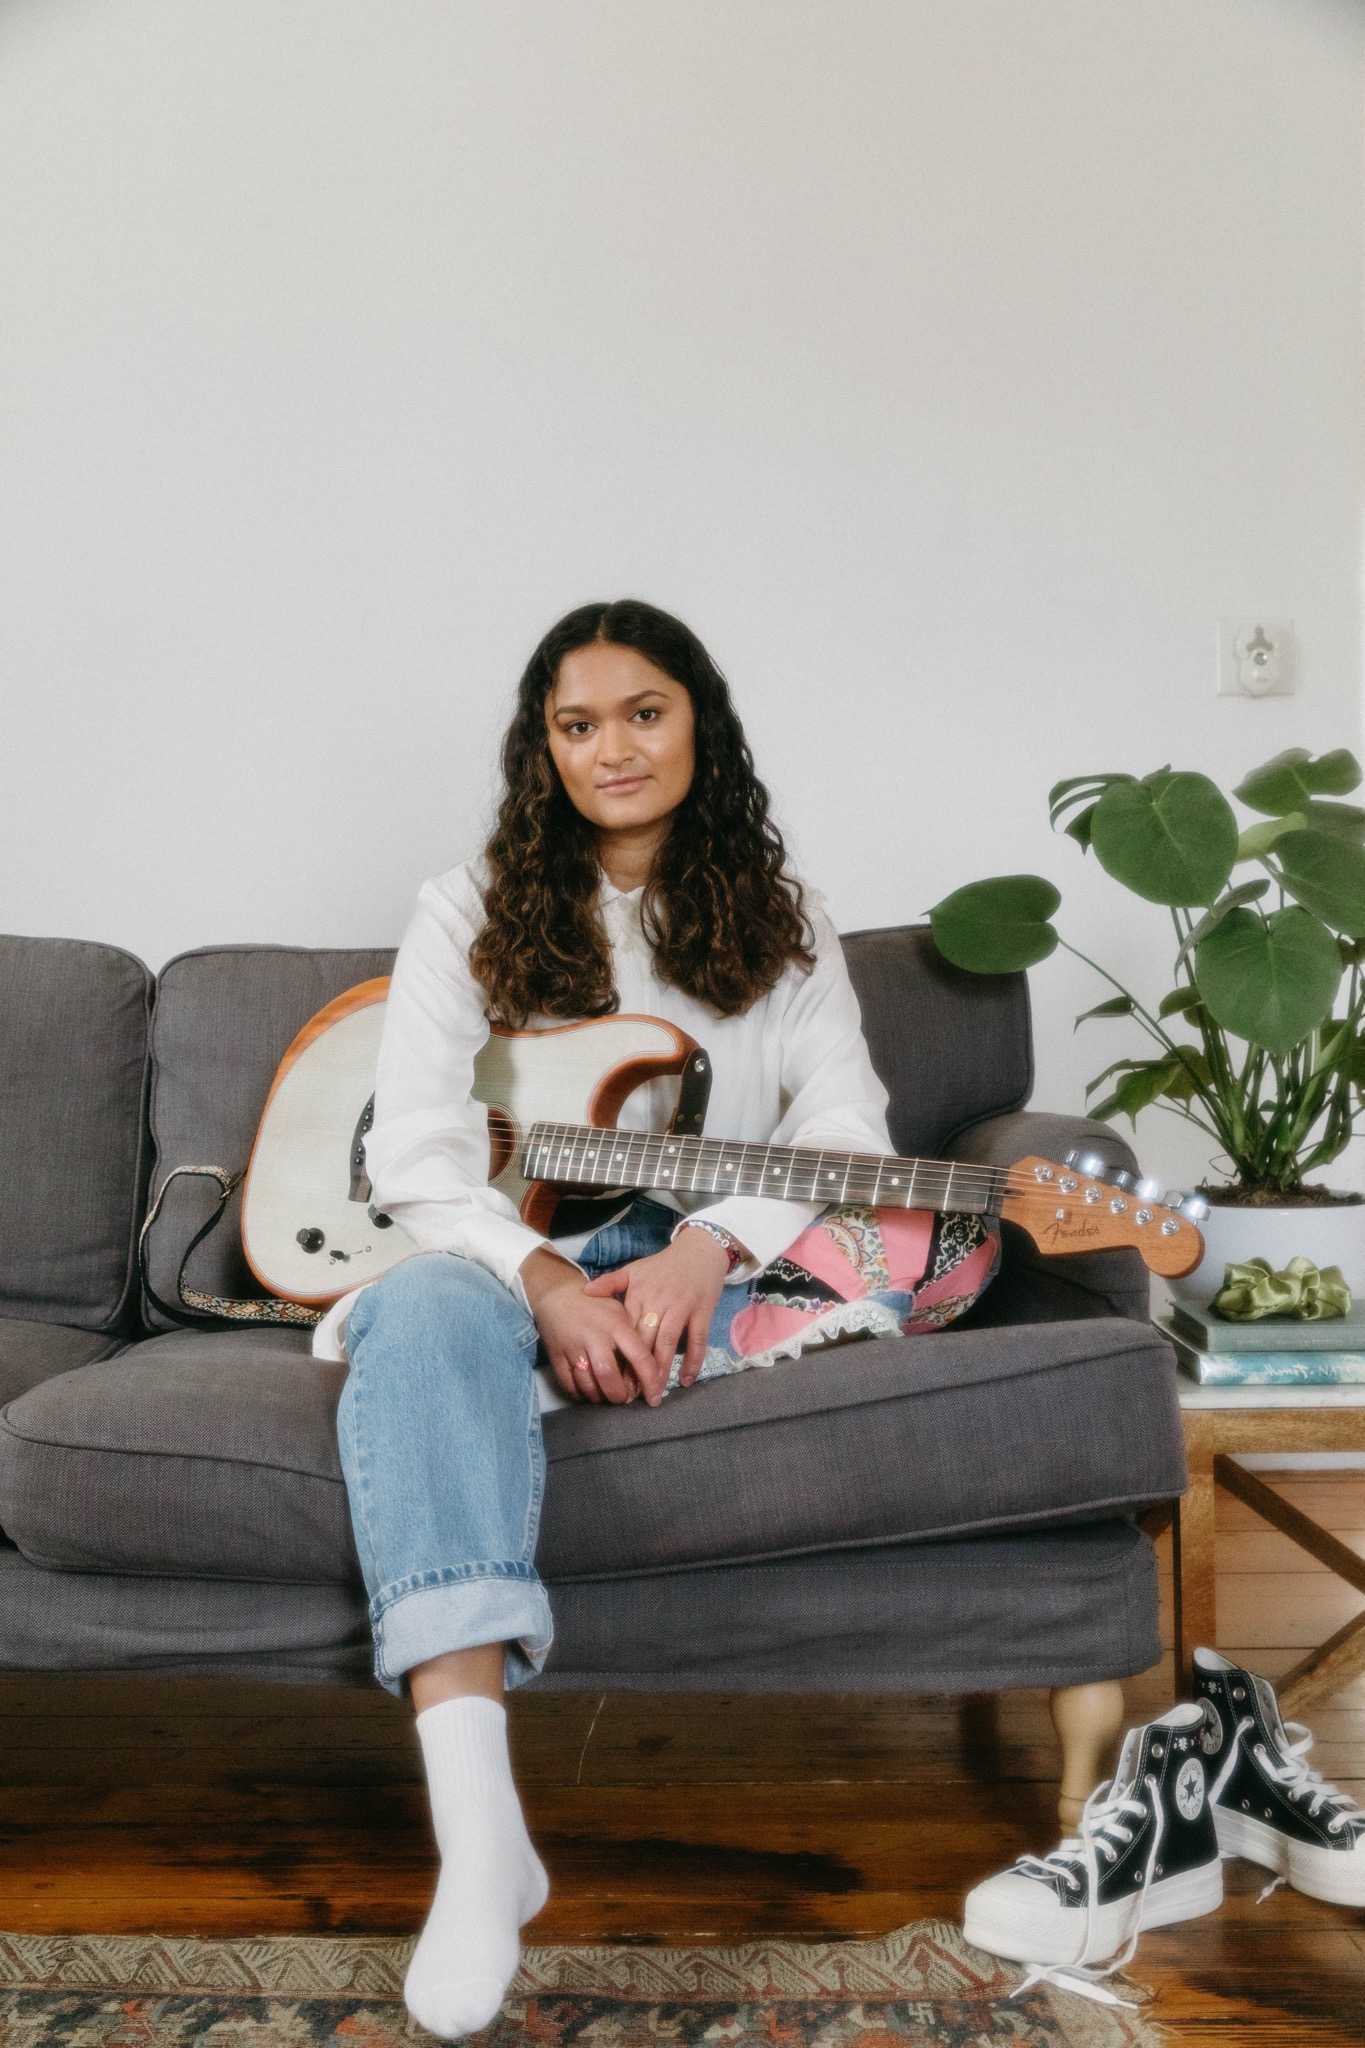 Padma Mynampaty sits on a couch holding a guitar